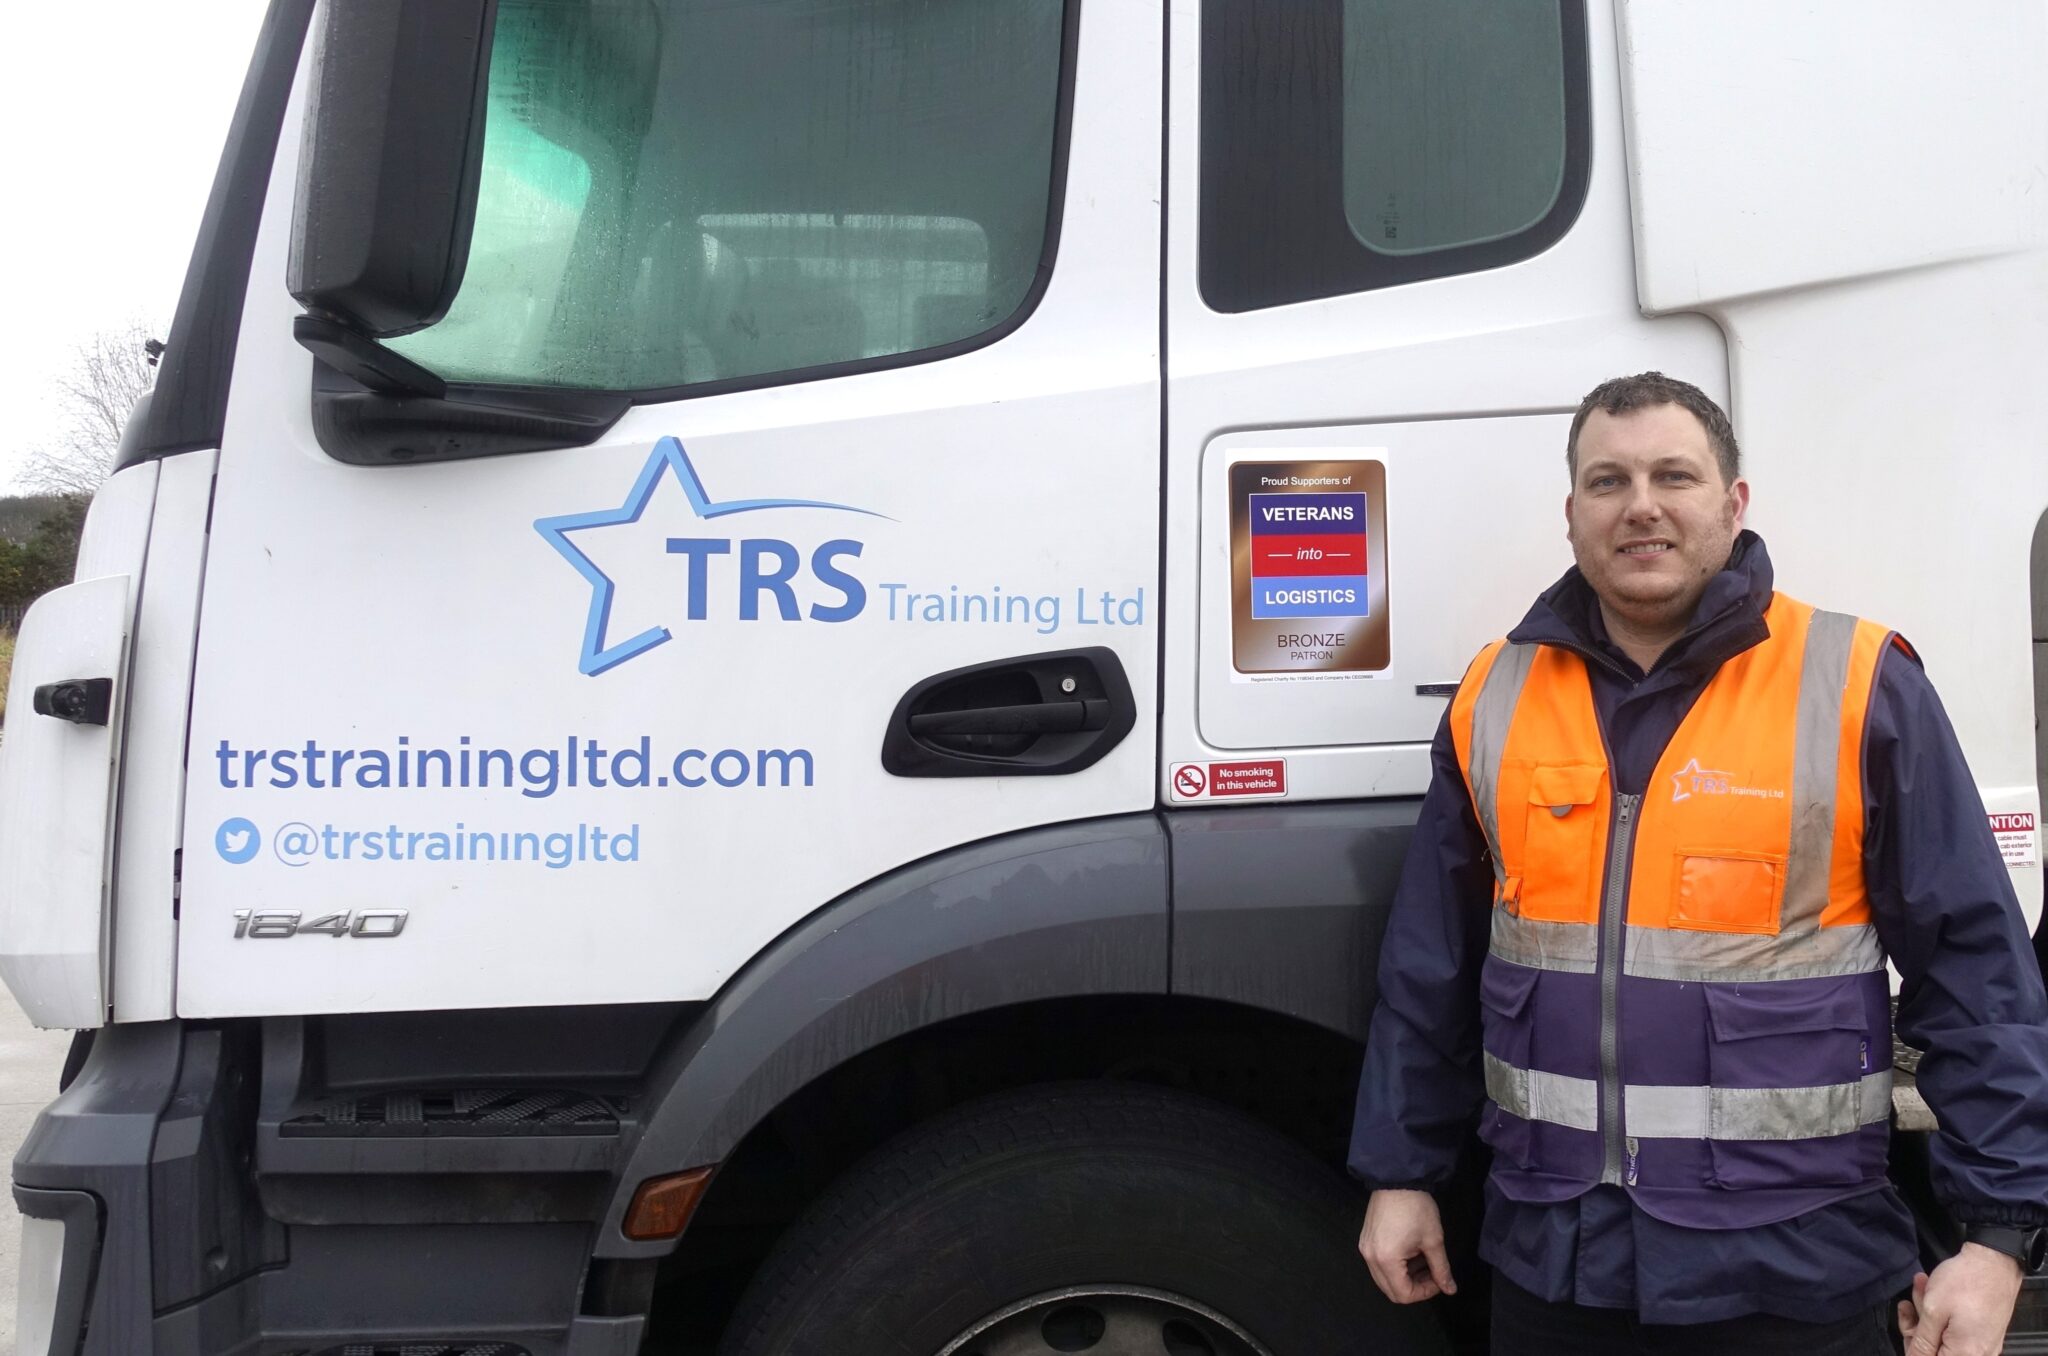 You are currently viewing Steered by Honour: TRS Supports Veterans Through Charity-Branded Fleet